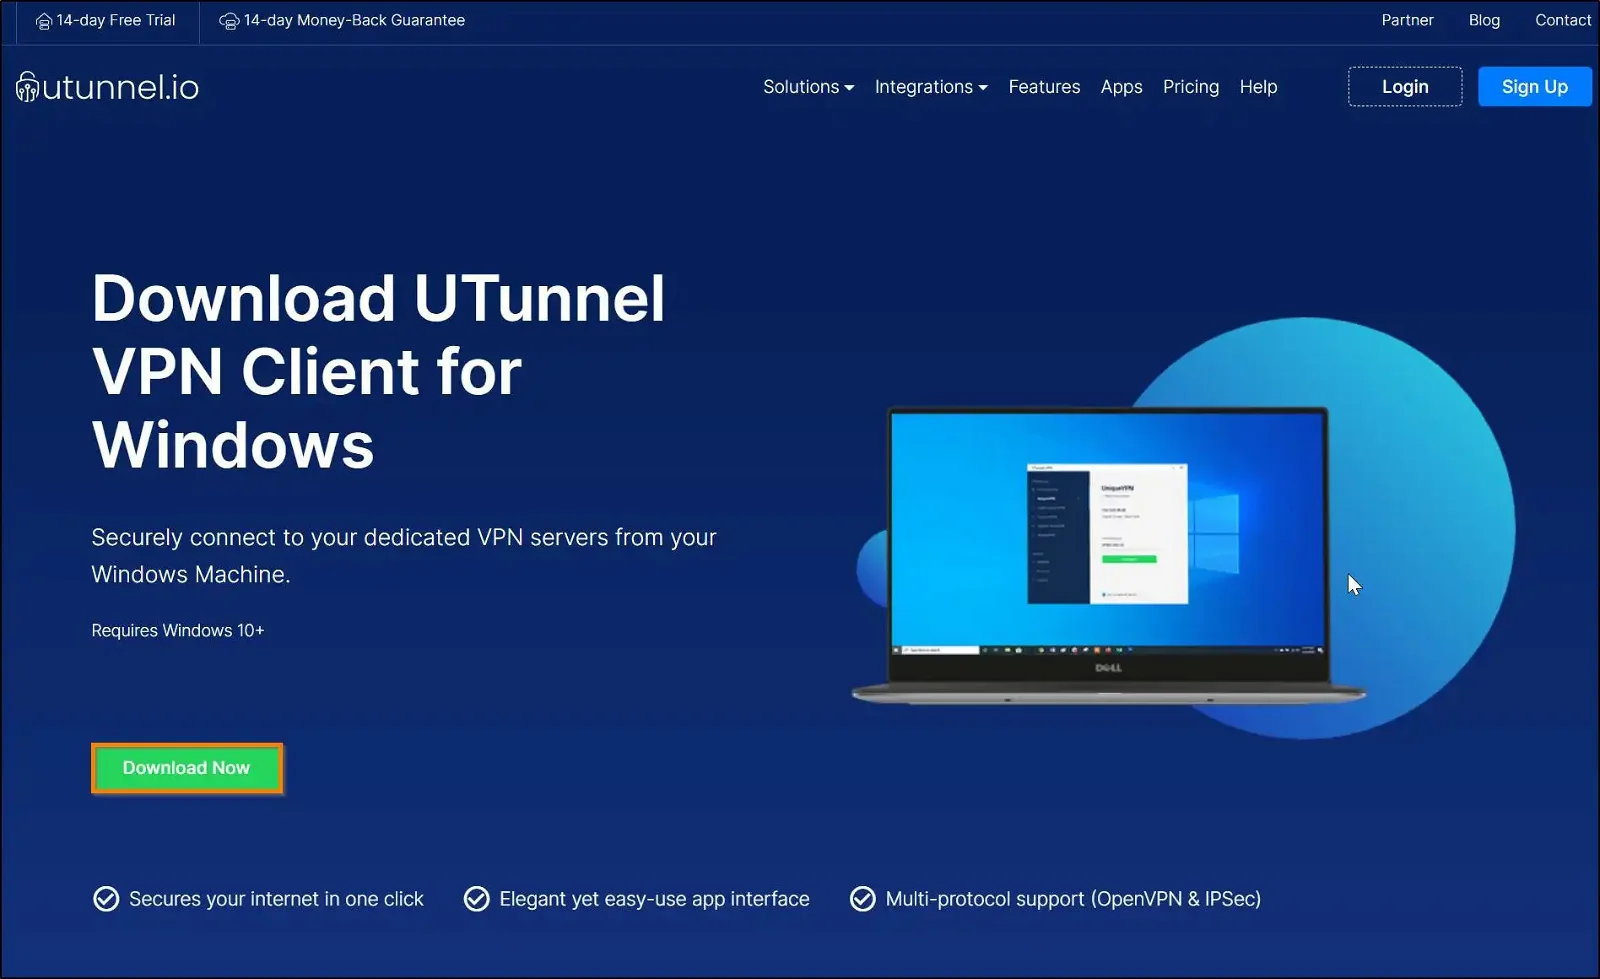 How to install VPN client on Windows 10 or 11 download UTunnel VPNclient app for windows